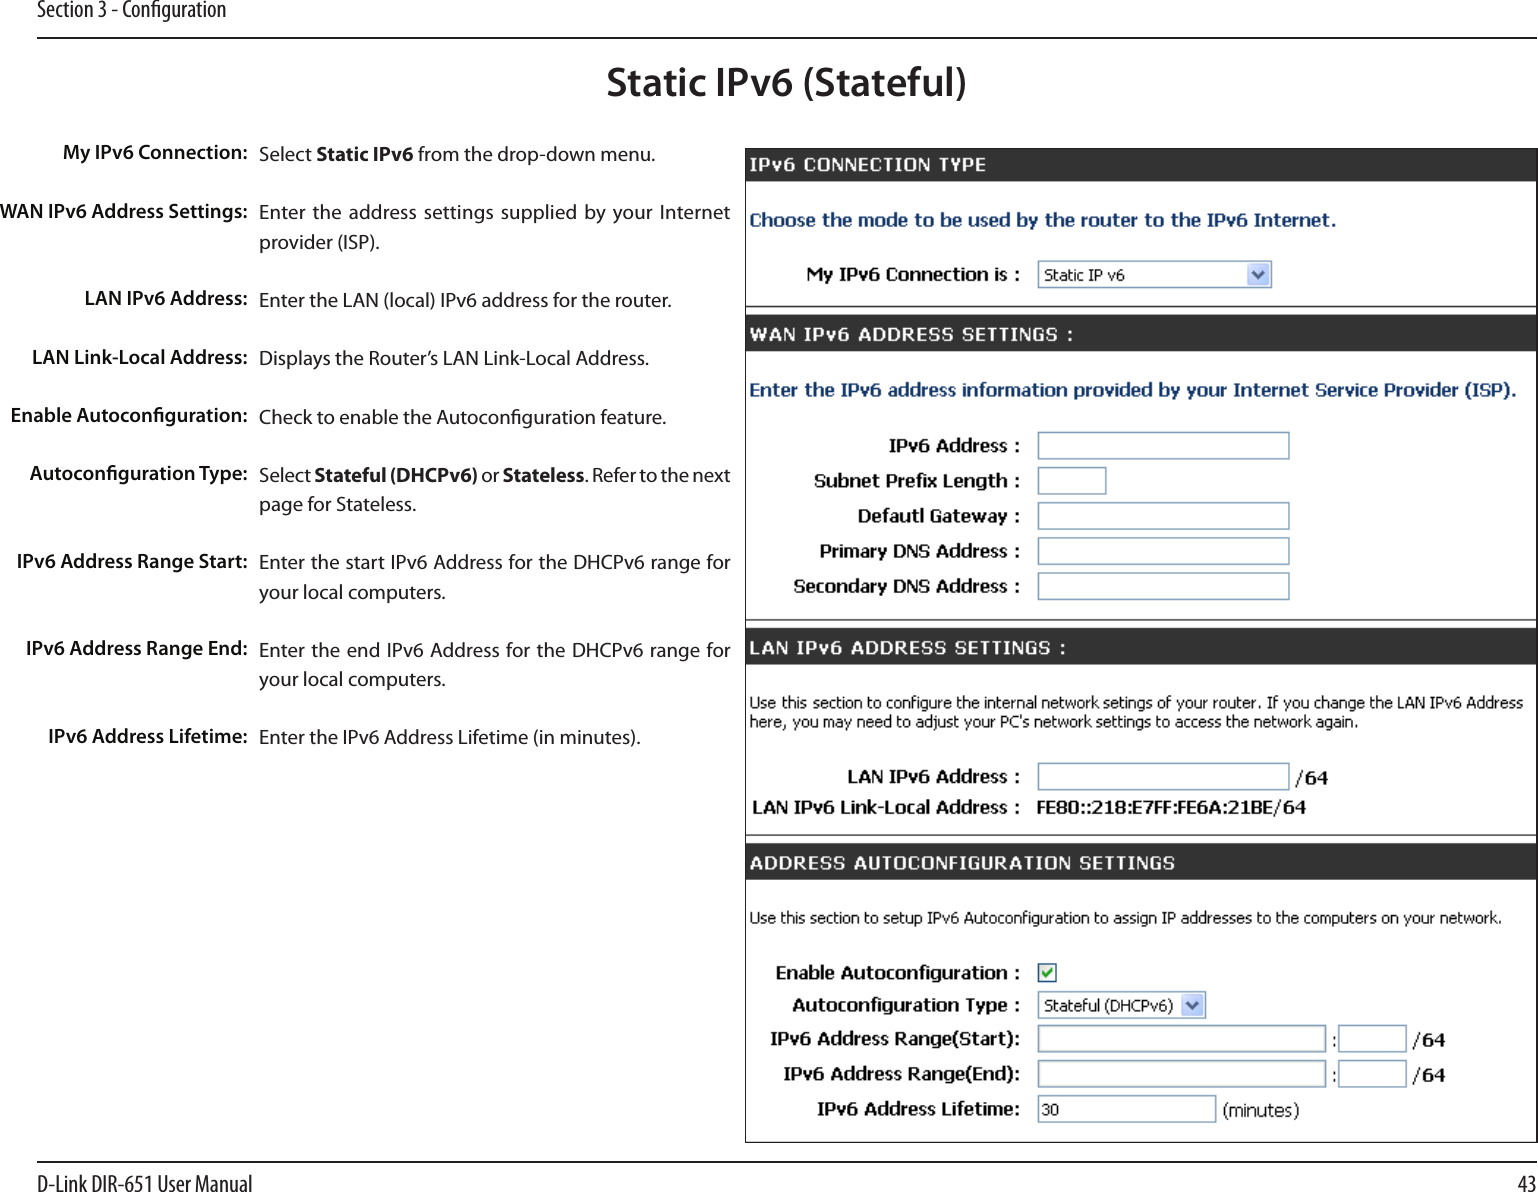 43D-Link DIR-651 User ManualSection 3 - CongurationStatic IPv6 (Stateful)Select Static IPv6 from the drop-down menu.Enter the address settings  supplied by your Internet provider (ISP). Enter the LAN (local) IPv6 address for the router. Displays the Router’s LAN Link-Local Address.Check to enable the Autoconguration feature.Select Stateful (DHCPv6) or Stateless. Refer to the next page for Stateless.Enter the start IPv6 Address for the DHCPv6 range for your local computers.Enter the end IPv6 Address for the DHCPv6 range for your local computers.Enter the IPv6 Address Lifetime (in minutes).My IPv6 Connection:WAN IPv6 Address Settings:LAN IPv6 Address:LAN Link-Local Address:Enable Autoconguration:Autoconguration Type:IPv6 Address Range Start:IPv6 Address Range End:IPv6 Address Lifetime: